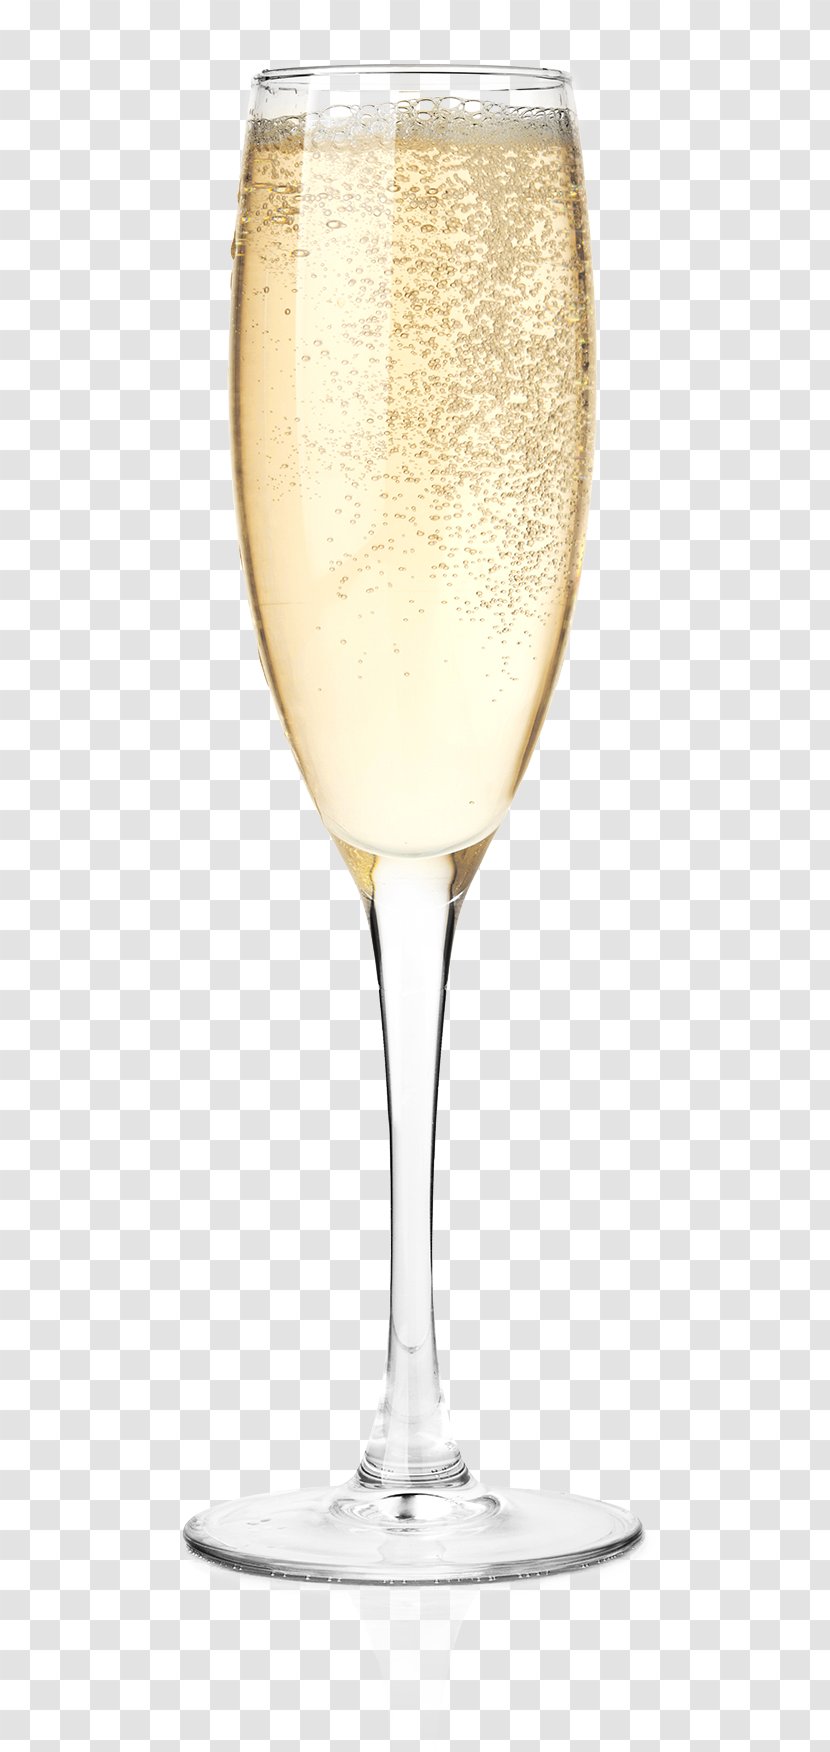 Champagne Cocktail Wine Glass - Stemware Transparent PNG